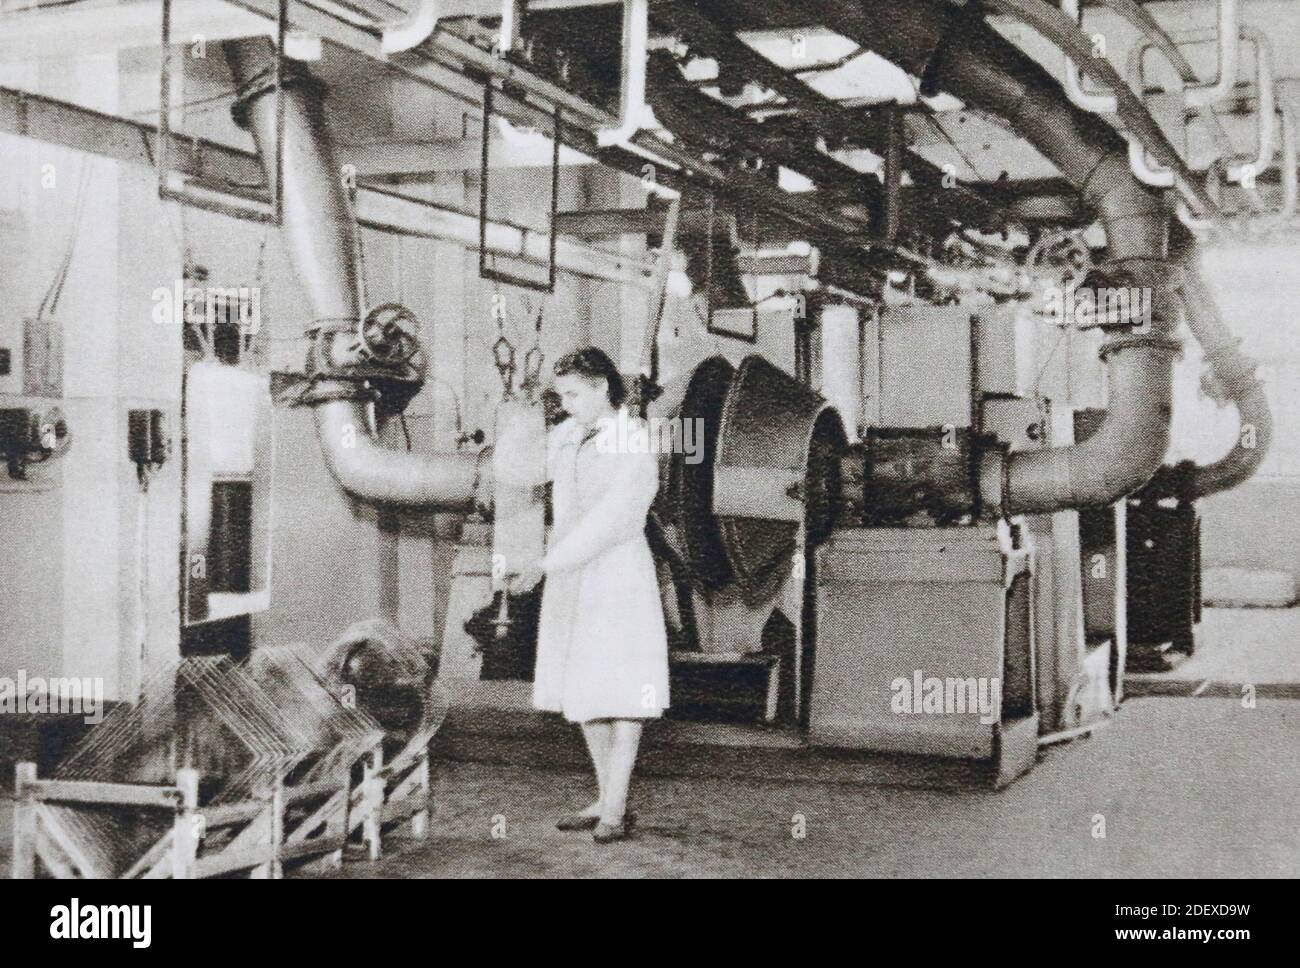 In the workshop for the production of automotive glass Stalinite of the Gorky Glass Factory in the USSR in the 1950s. Stock Photo